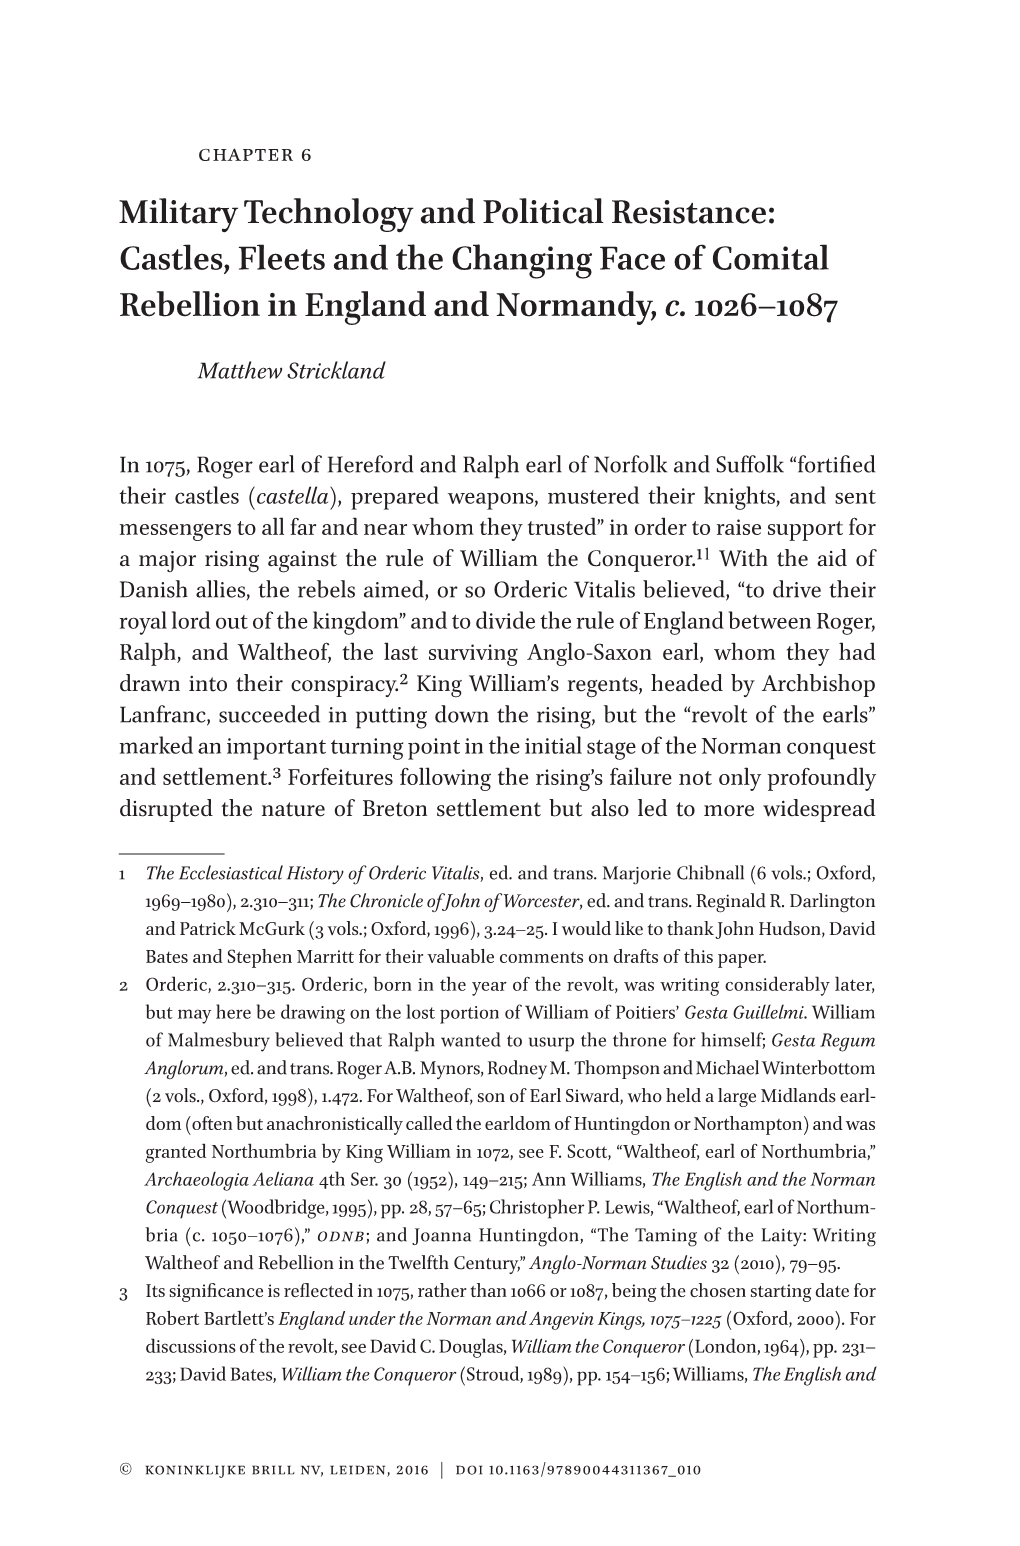 Military Technology and Political Resistance: Castles, Fleets and the Changing Face of Comital Rebellion in England and Normandy, C